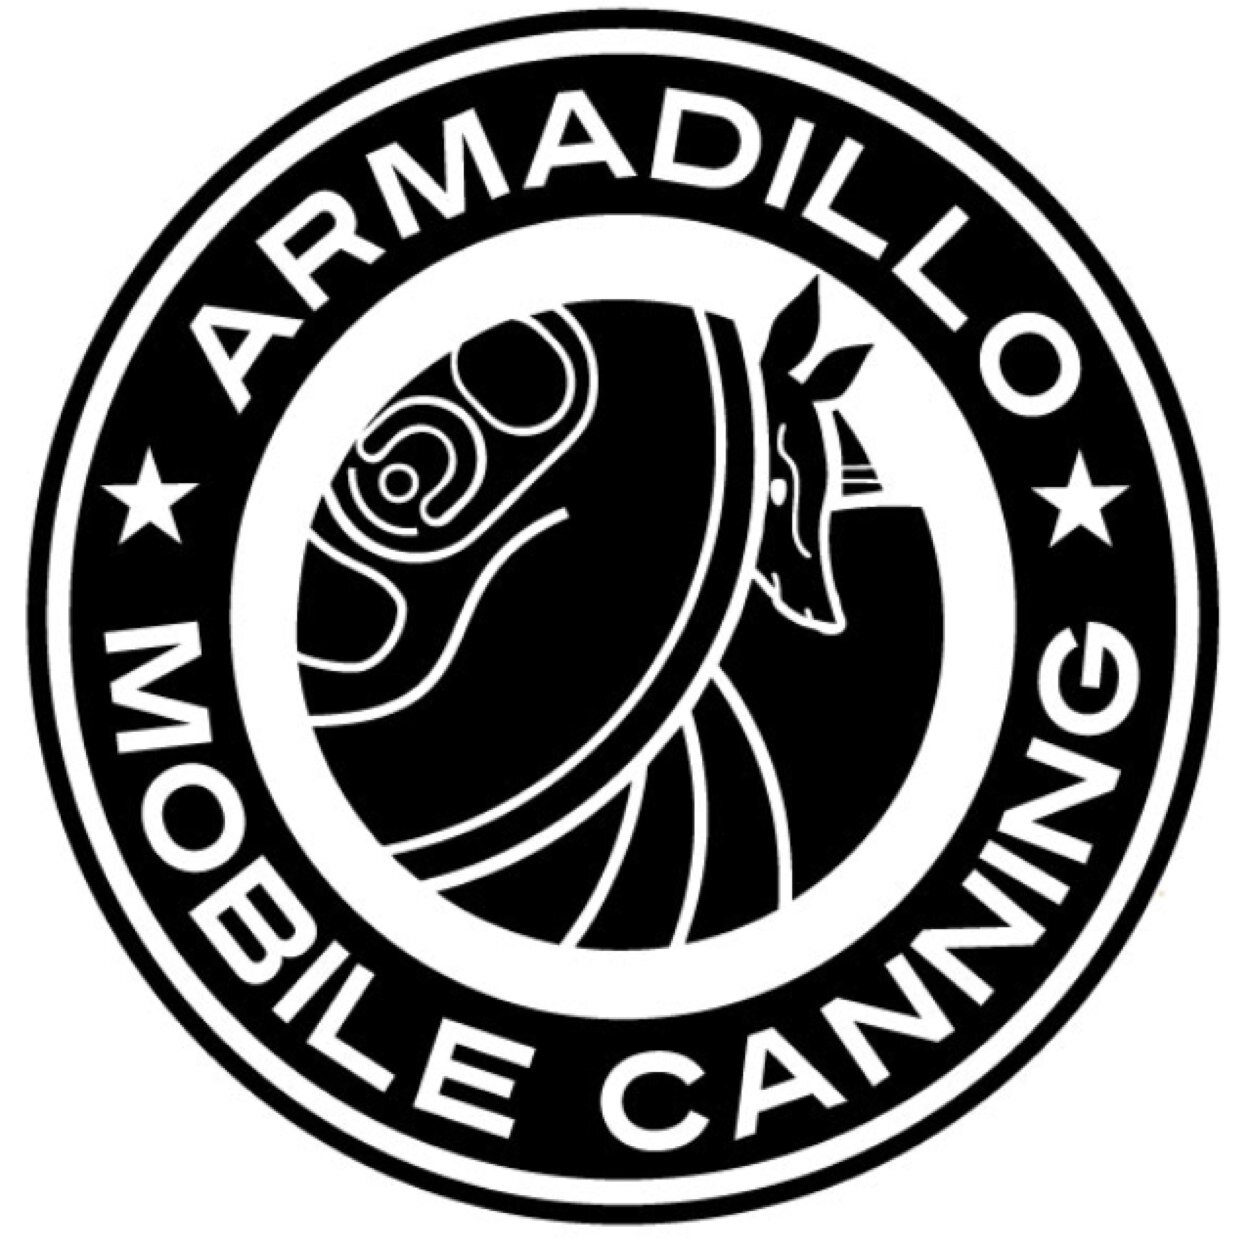 With over 15 million canned, Armadillo is proud to be YOUR Texas mobile canner. You brew it, we can it. Cheers!